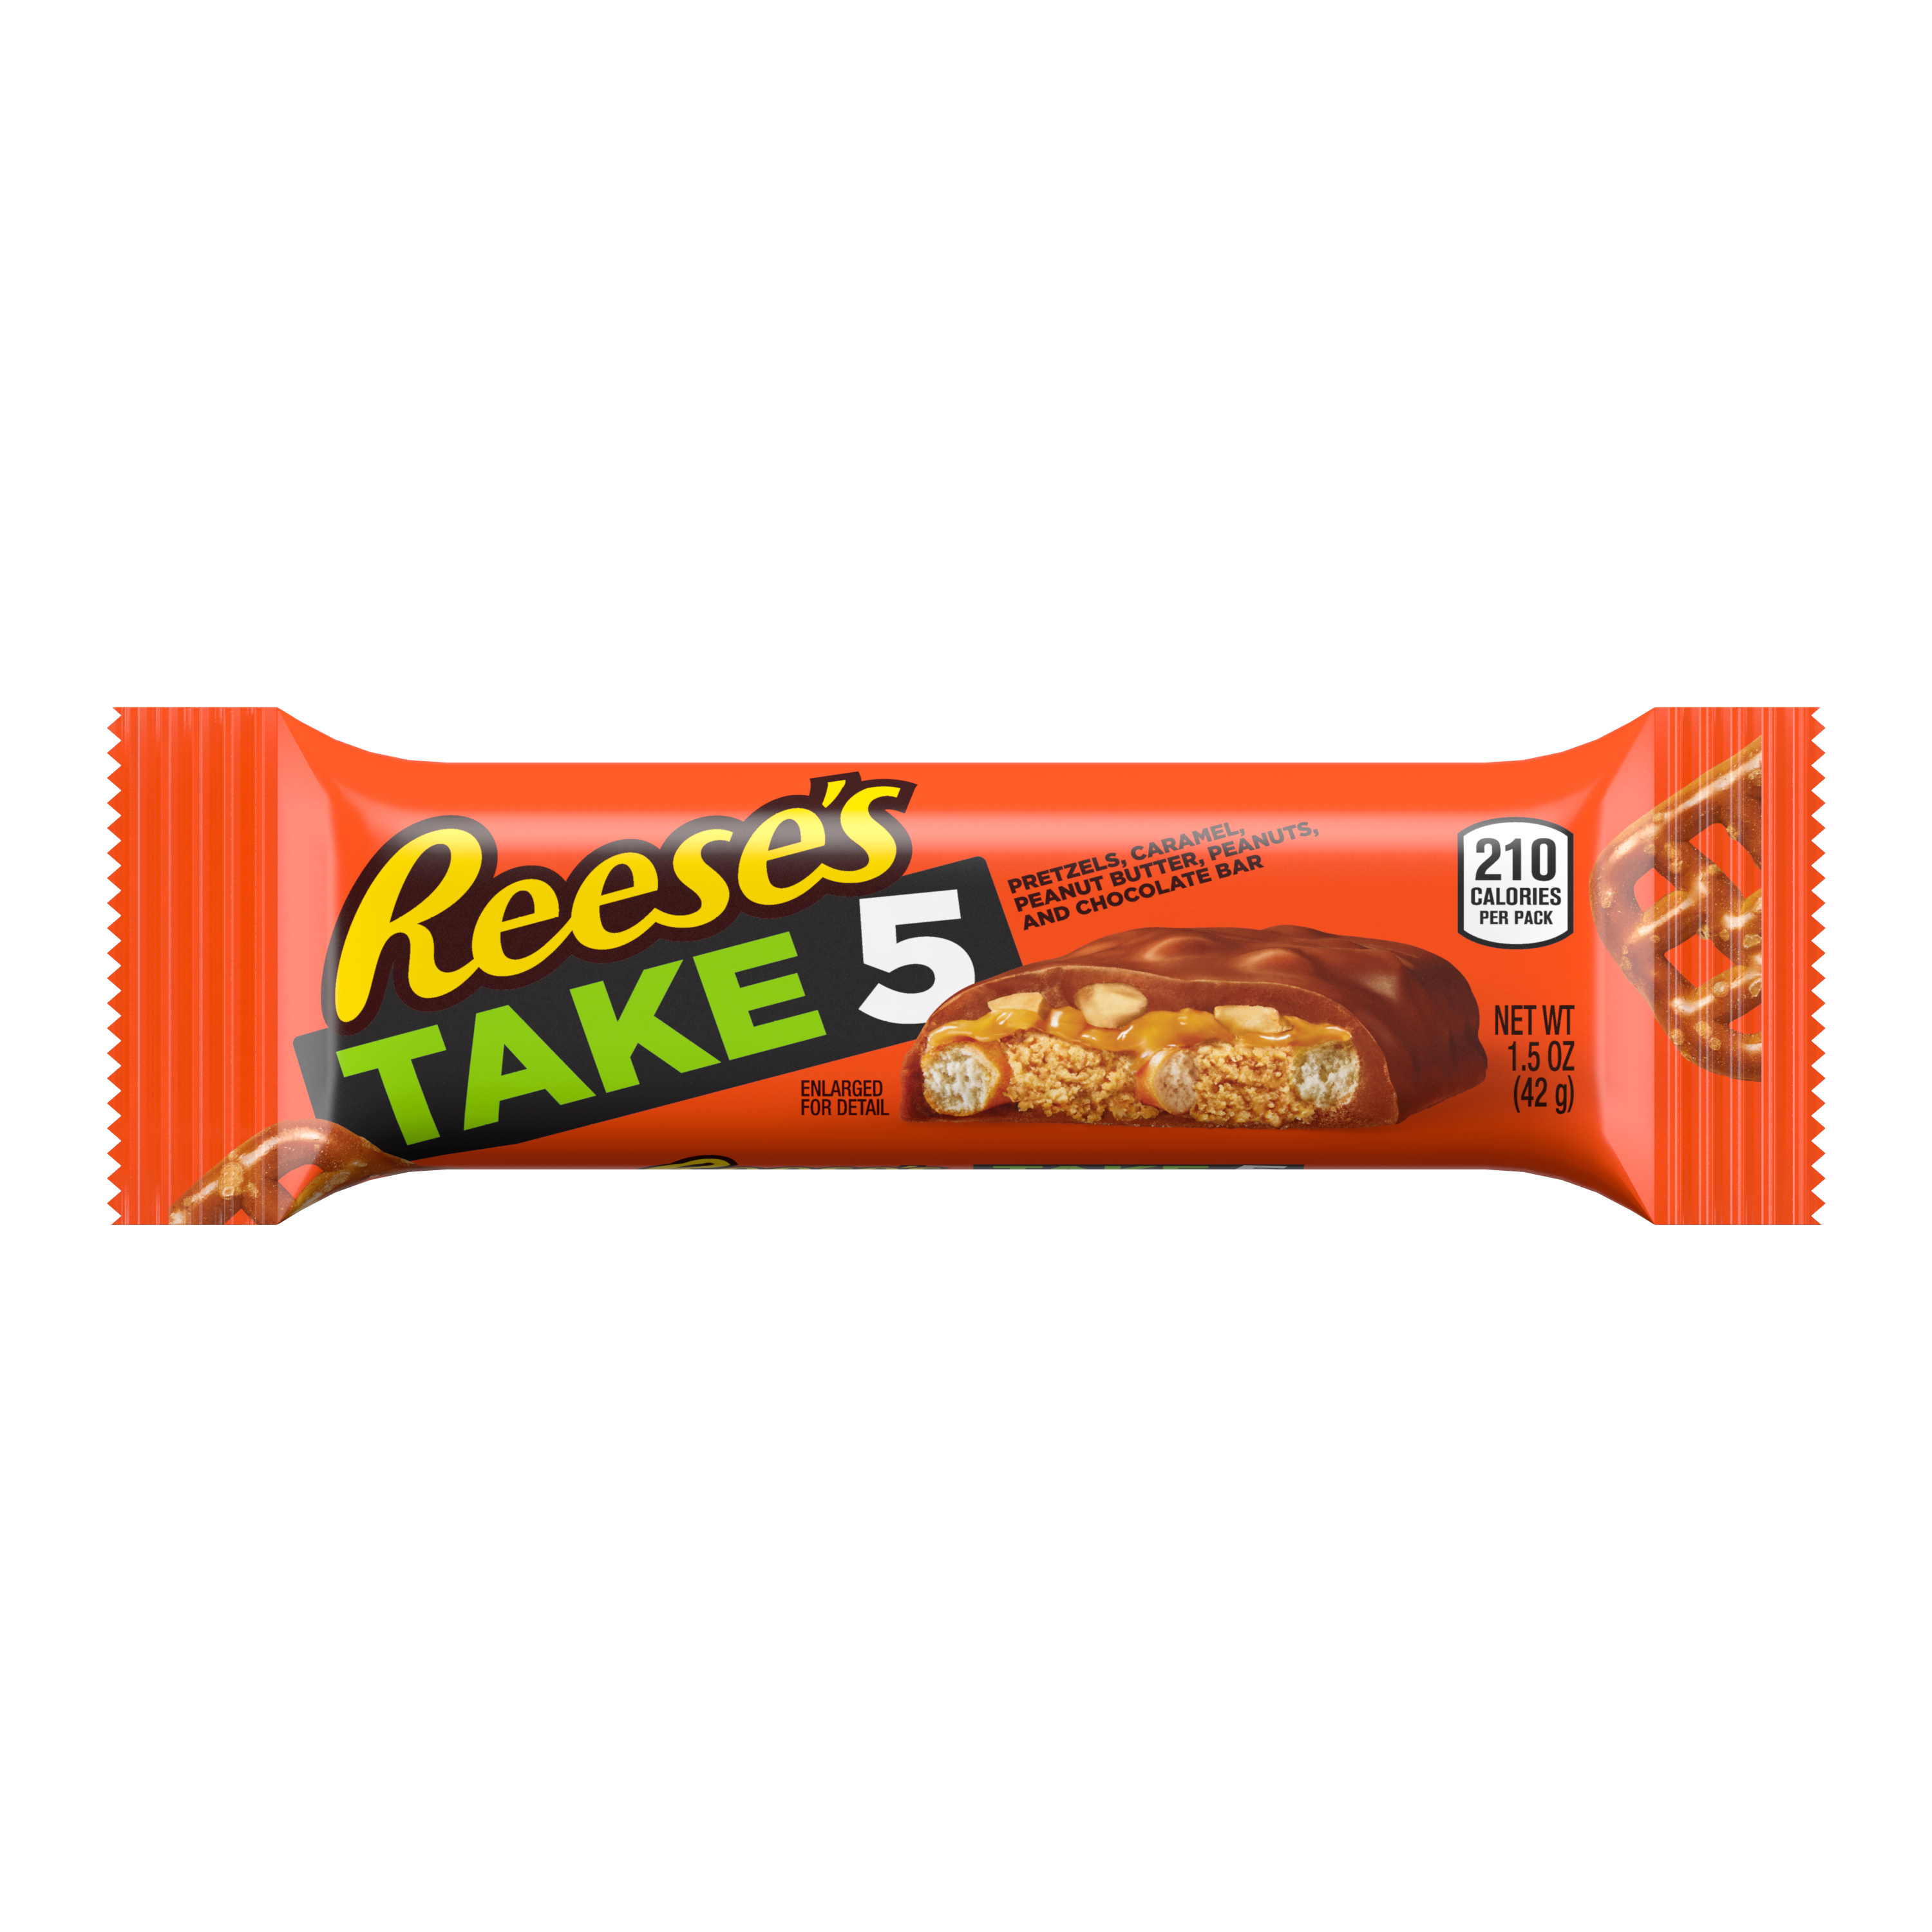 REESE'S TAKE5 Chocolate Peanut Butter Candy Bar, 1.5 oz - Front of Package